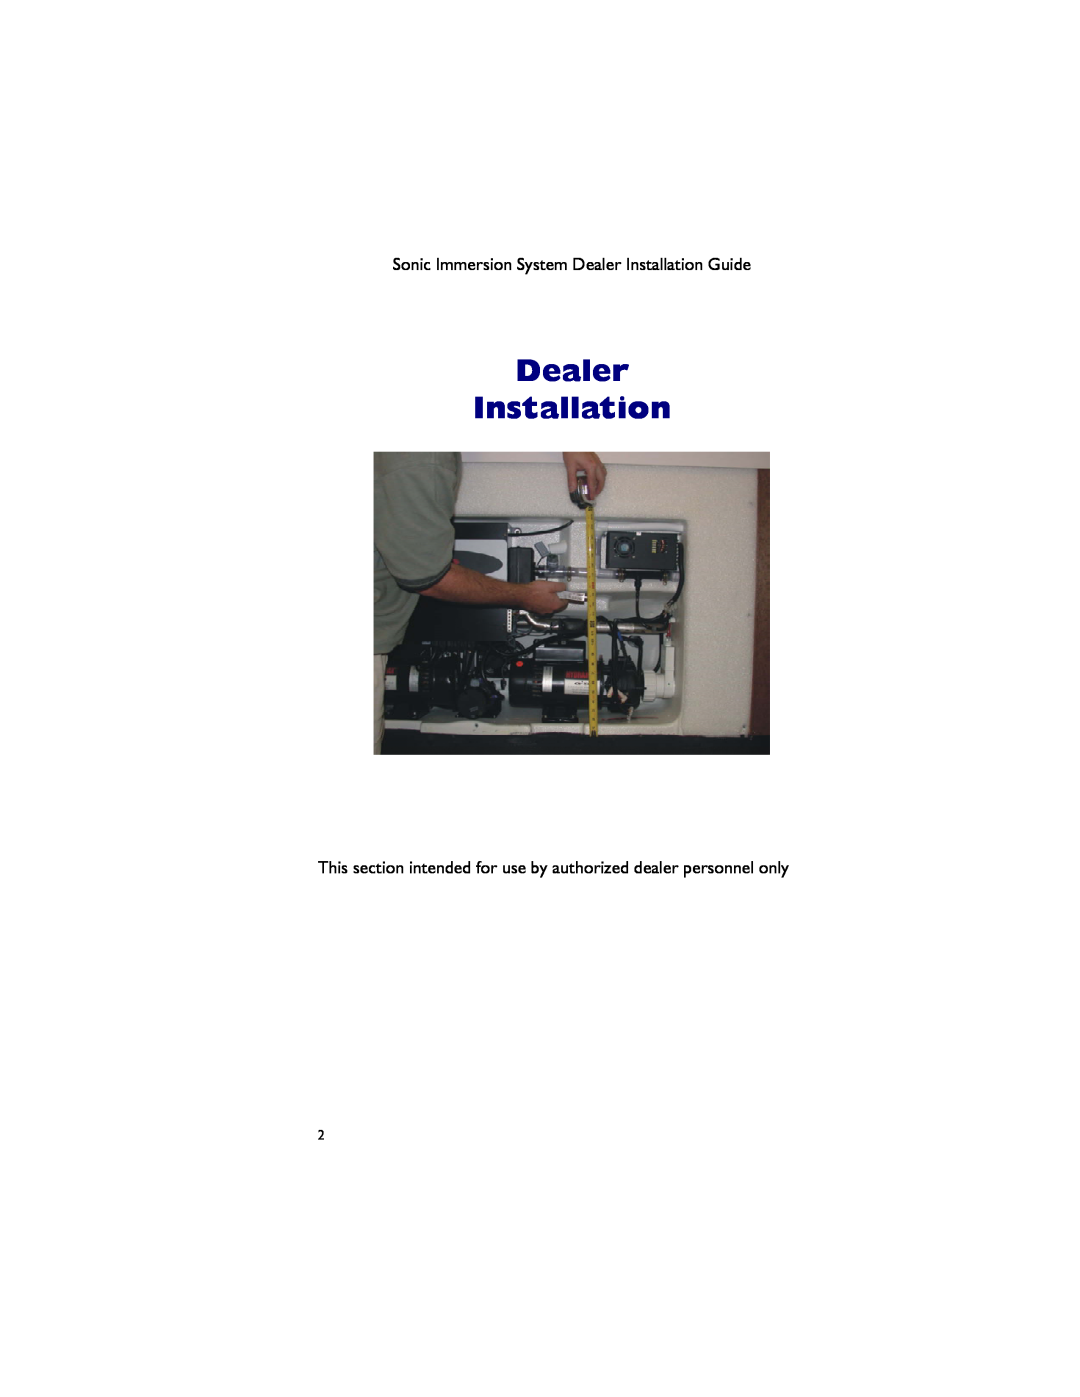 Dimension One Spas 01510-1030 manual Sonic Immersion System Dealer Installation Guide 